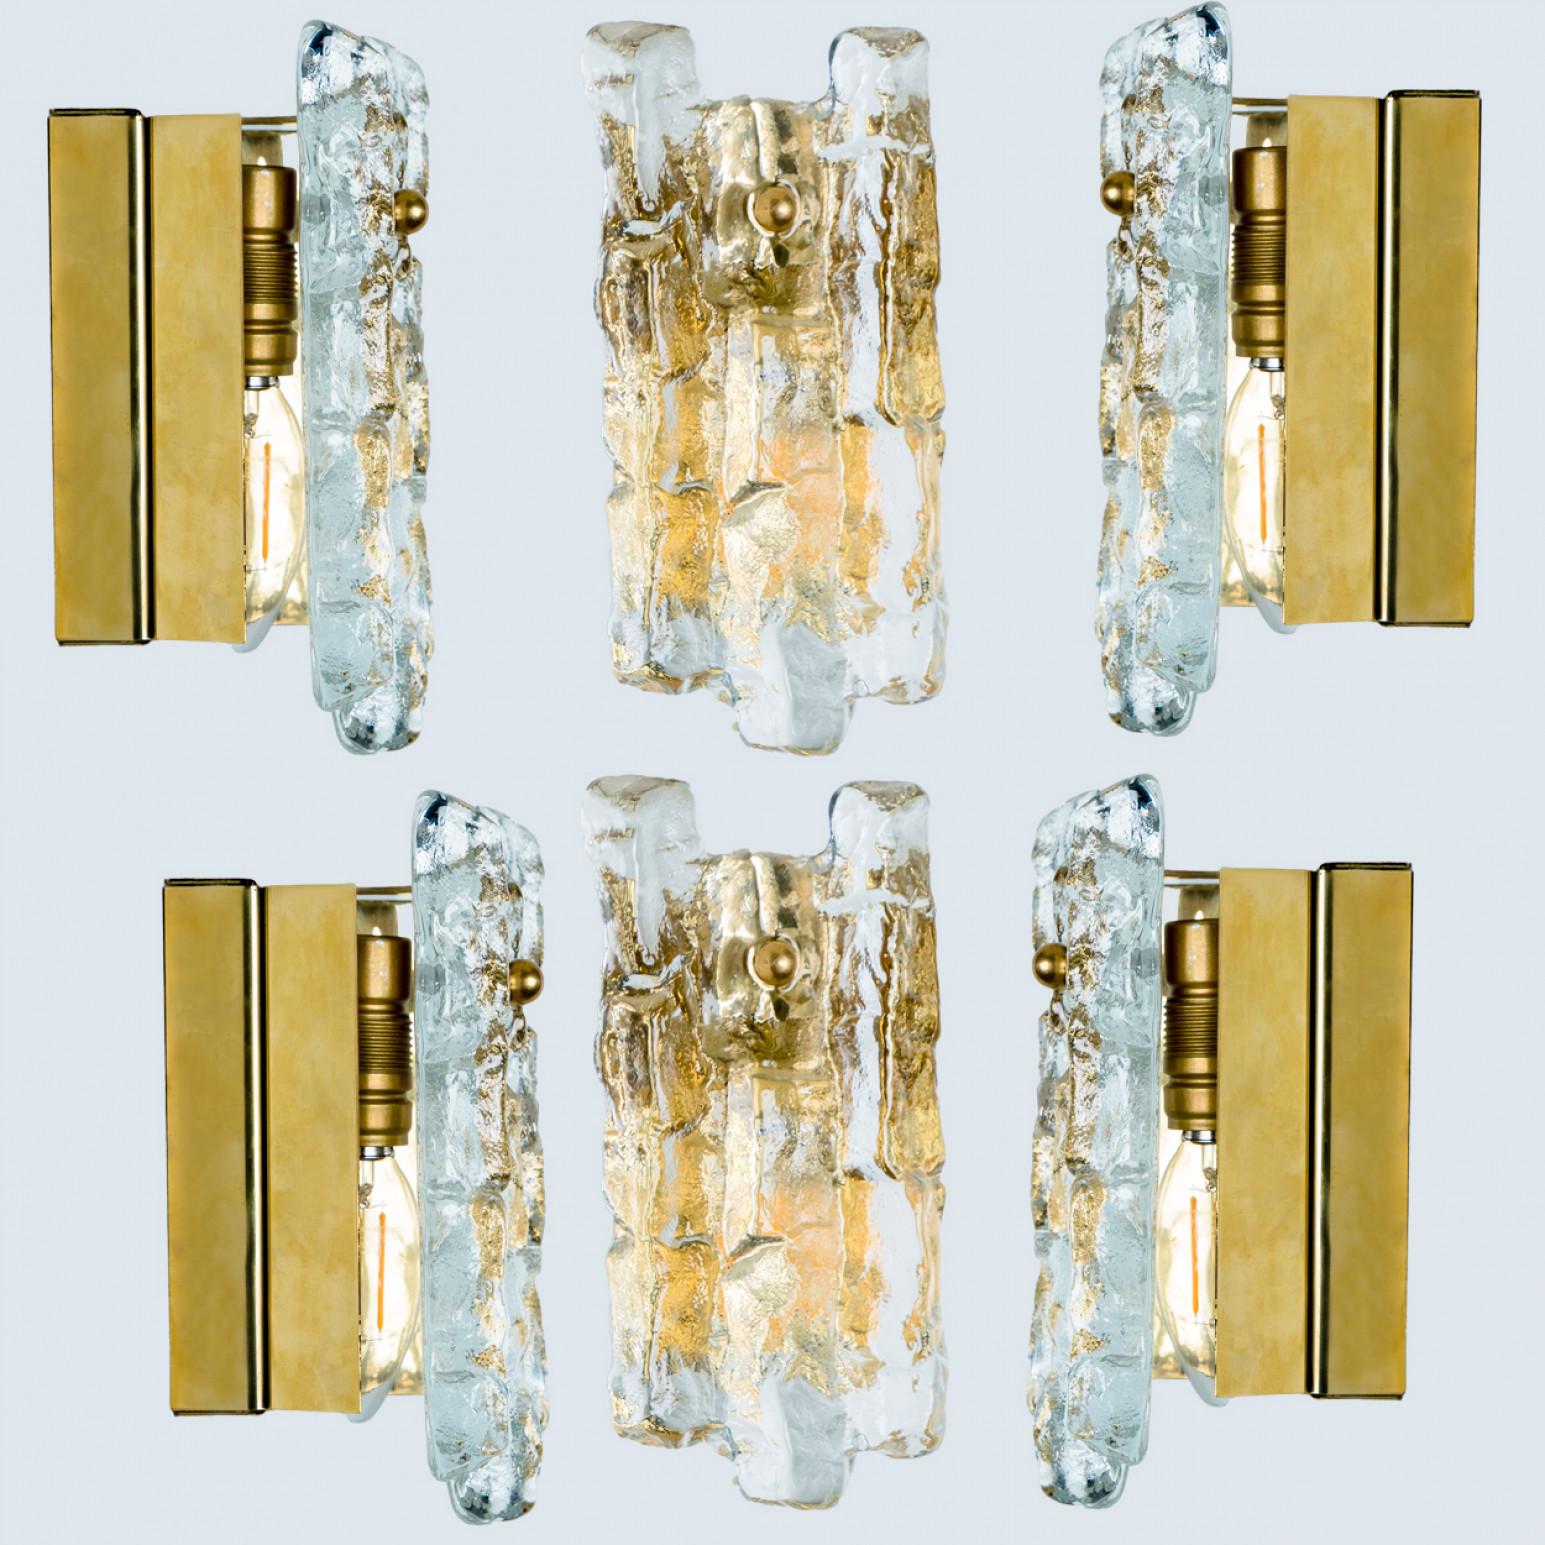 Textured Ice glass Gold Wall Lights Kalmar, 1970s For Sale 3